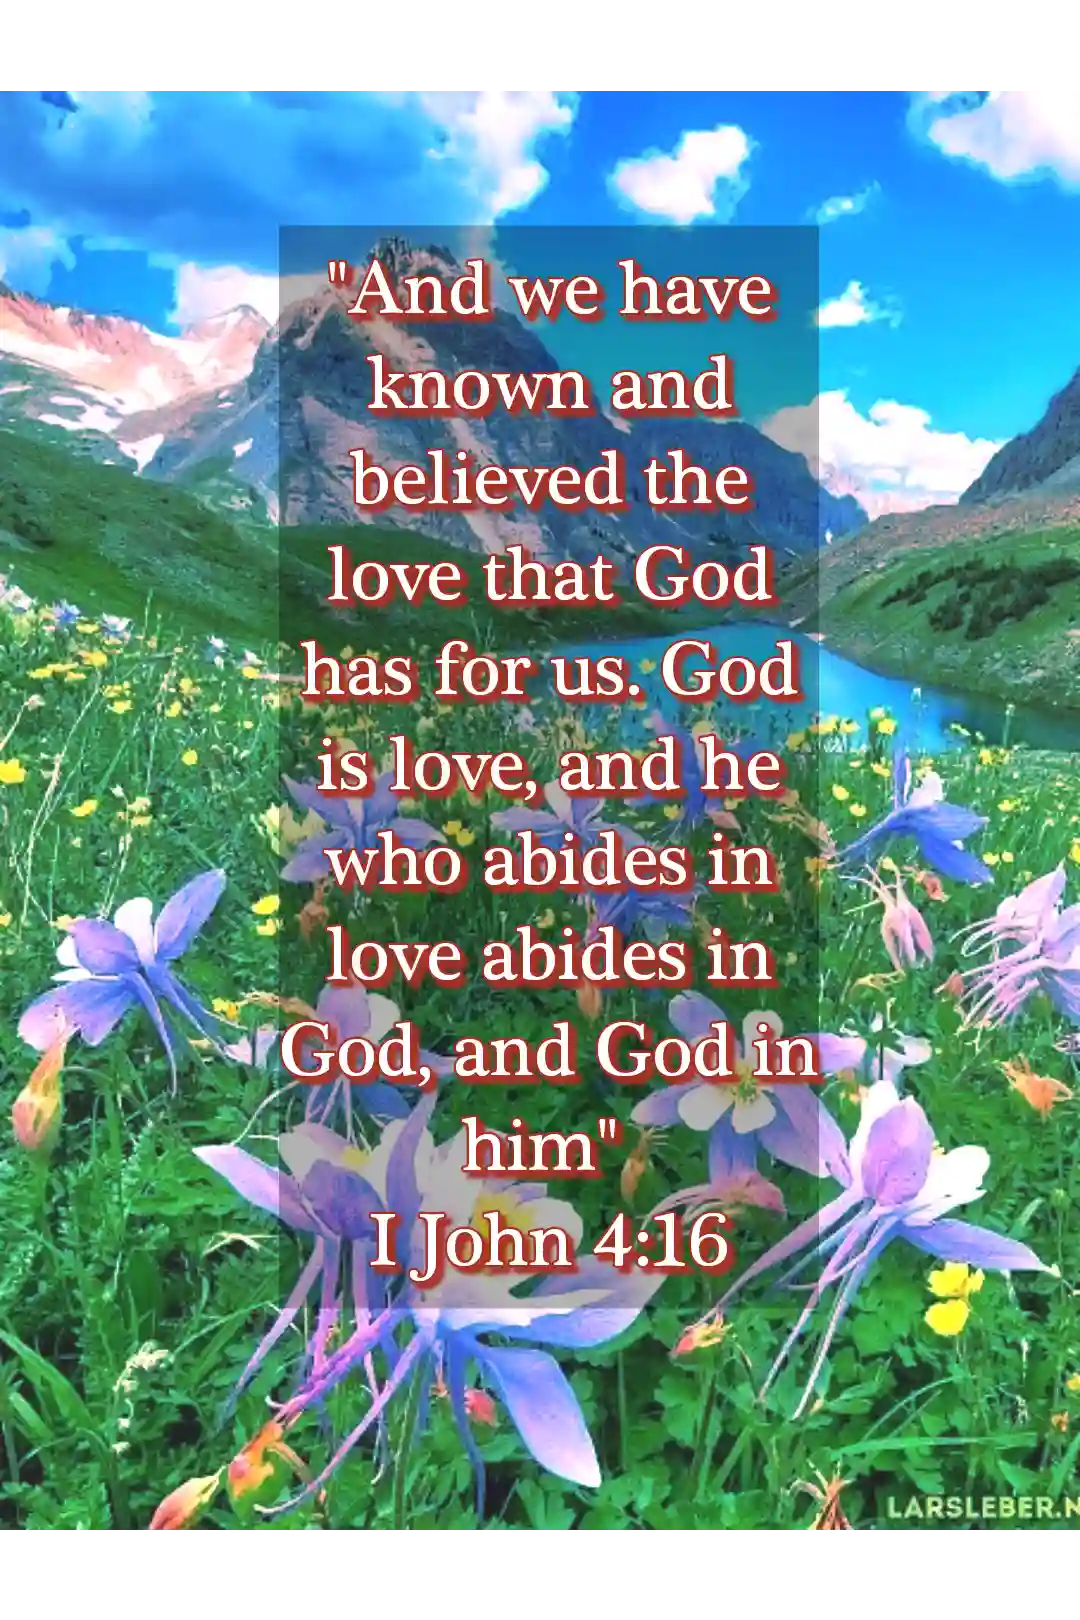 Bible verses about god’s love for us (1 John 4:16)